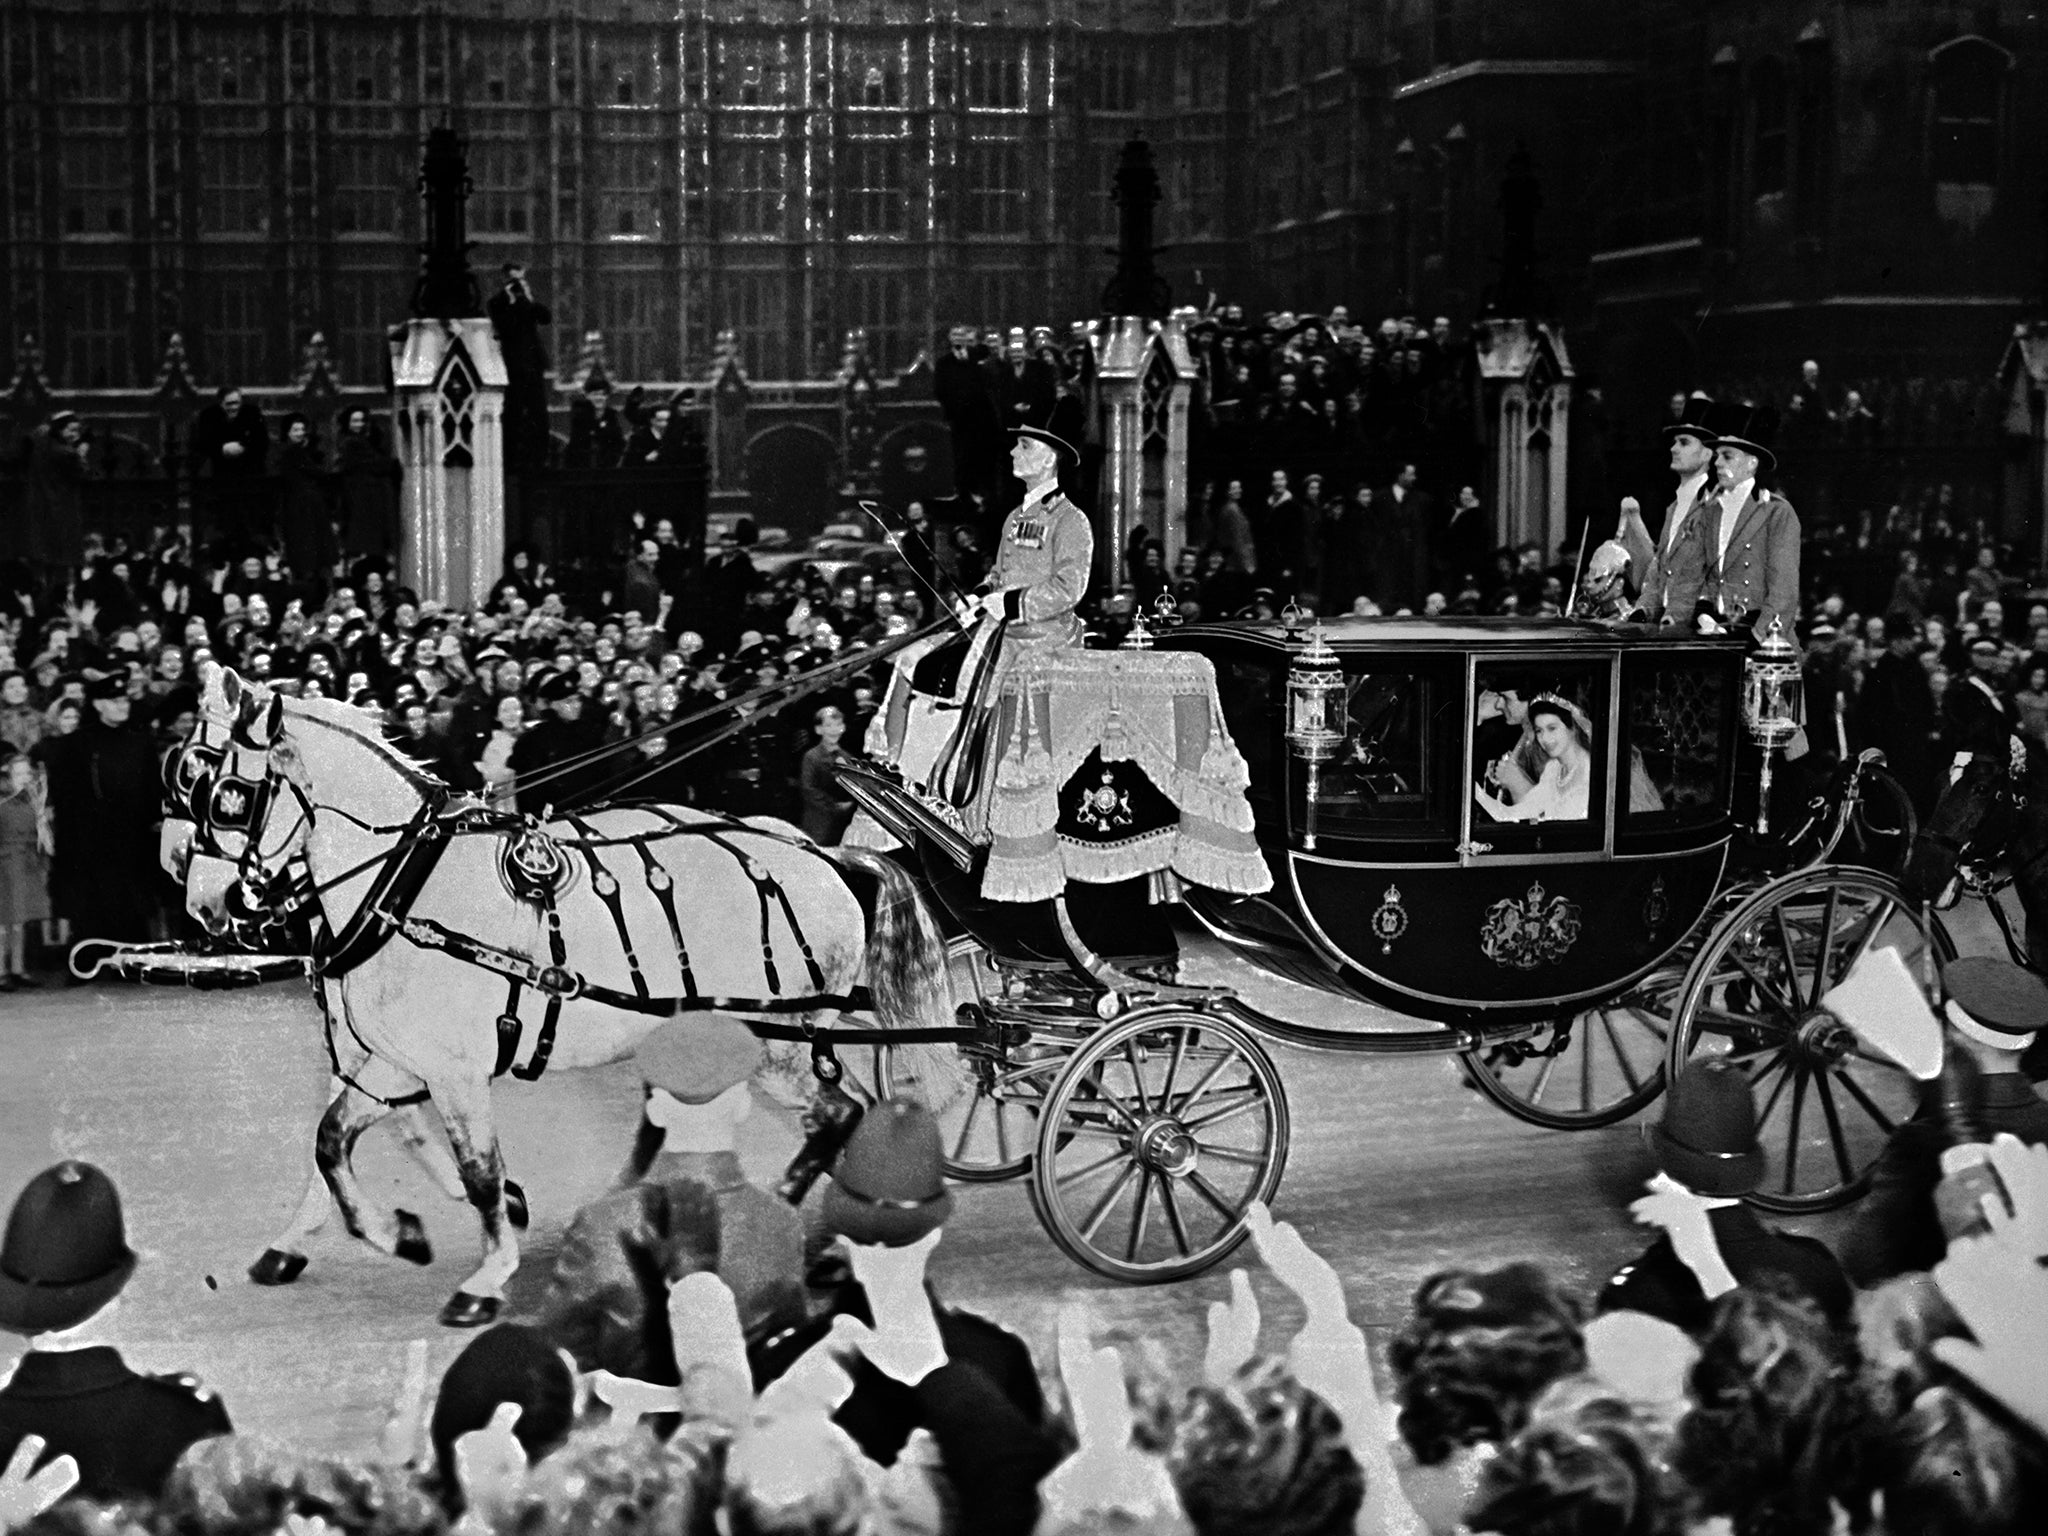 Elizabeth and her husband Prince Philip are cheered by the crowd after their wedding ceremony, on 20 November 1947, on their road to Buckingham Palace, London